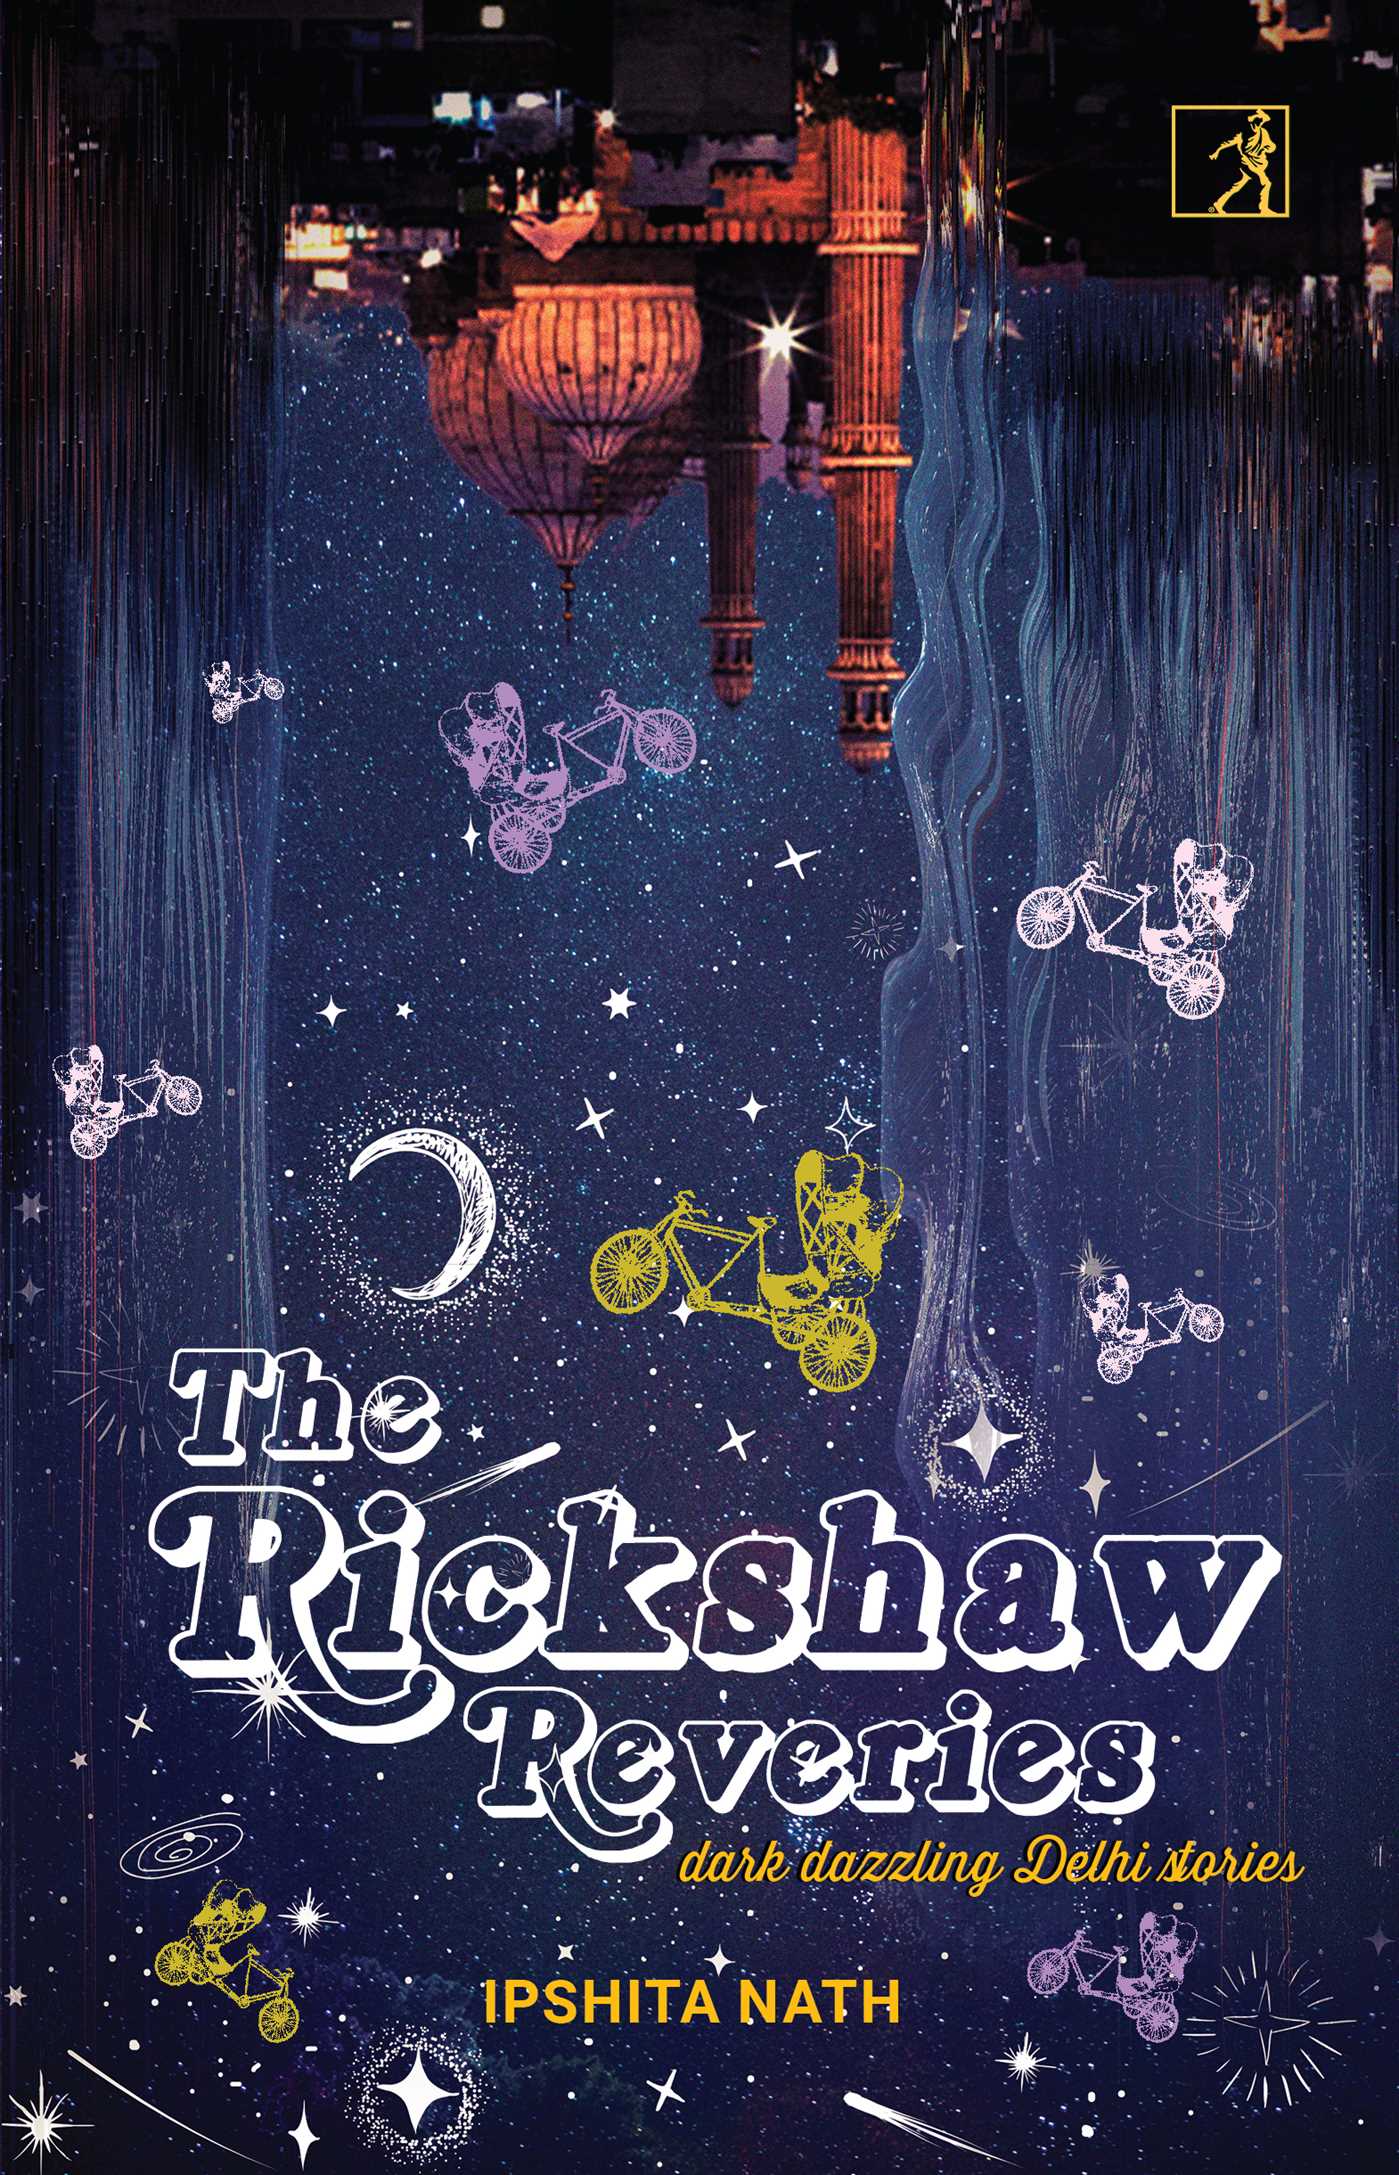 The terrifying and enticing stories in "The Rickshaw Reveries" explore Delhi's many subterranean truths